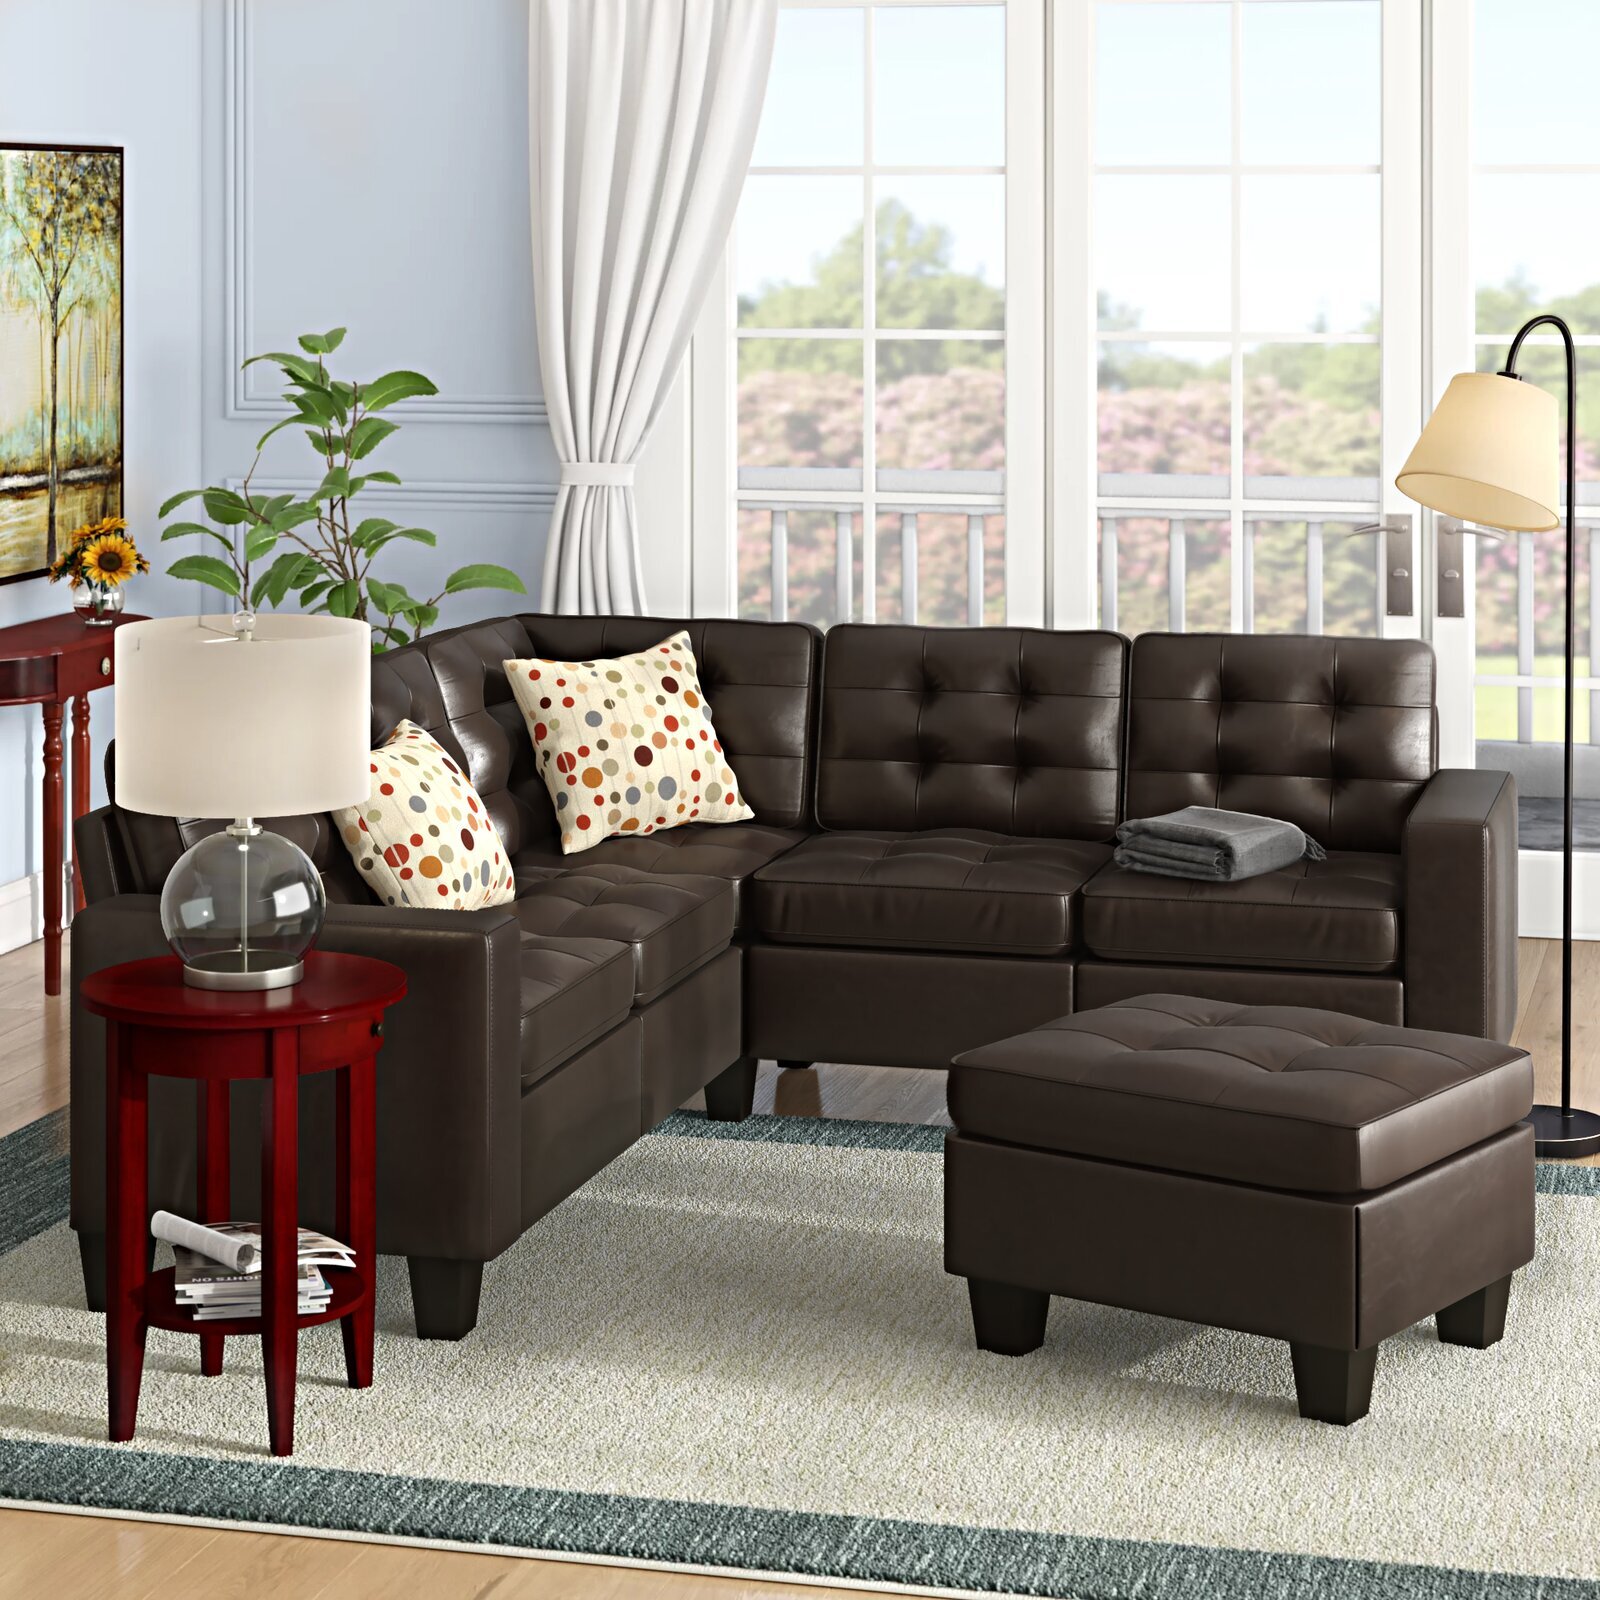 Symmetrical Corner Leather Small Sectional with Ottoman and Tufted Cushions